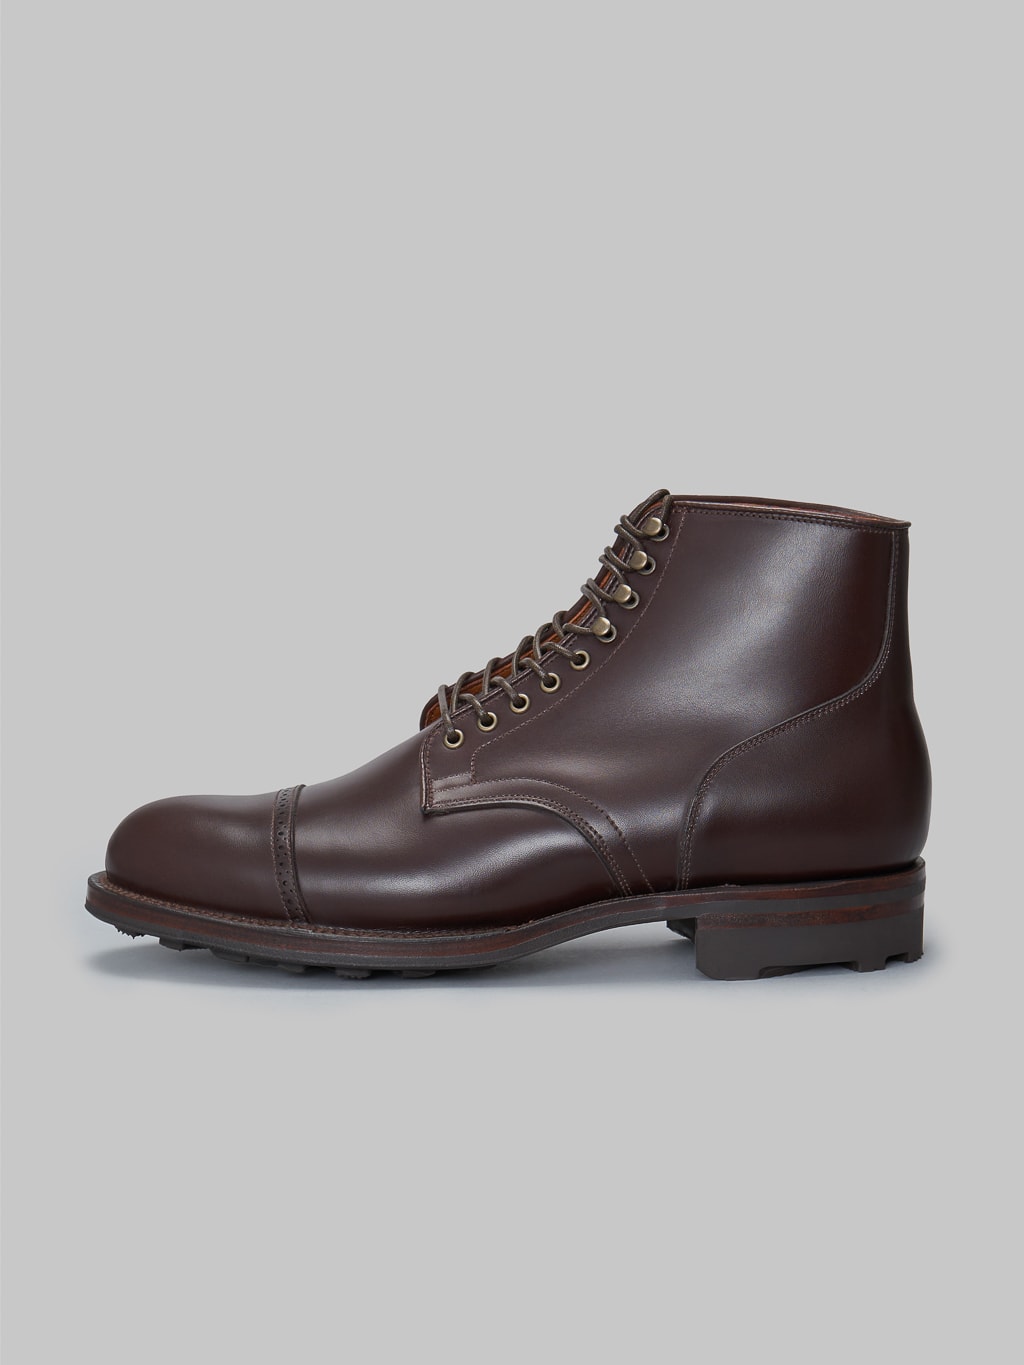 Viberg Service Boot 2030 Annonay Vocalau Warm Brown French Calf natural leather